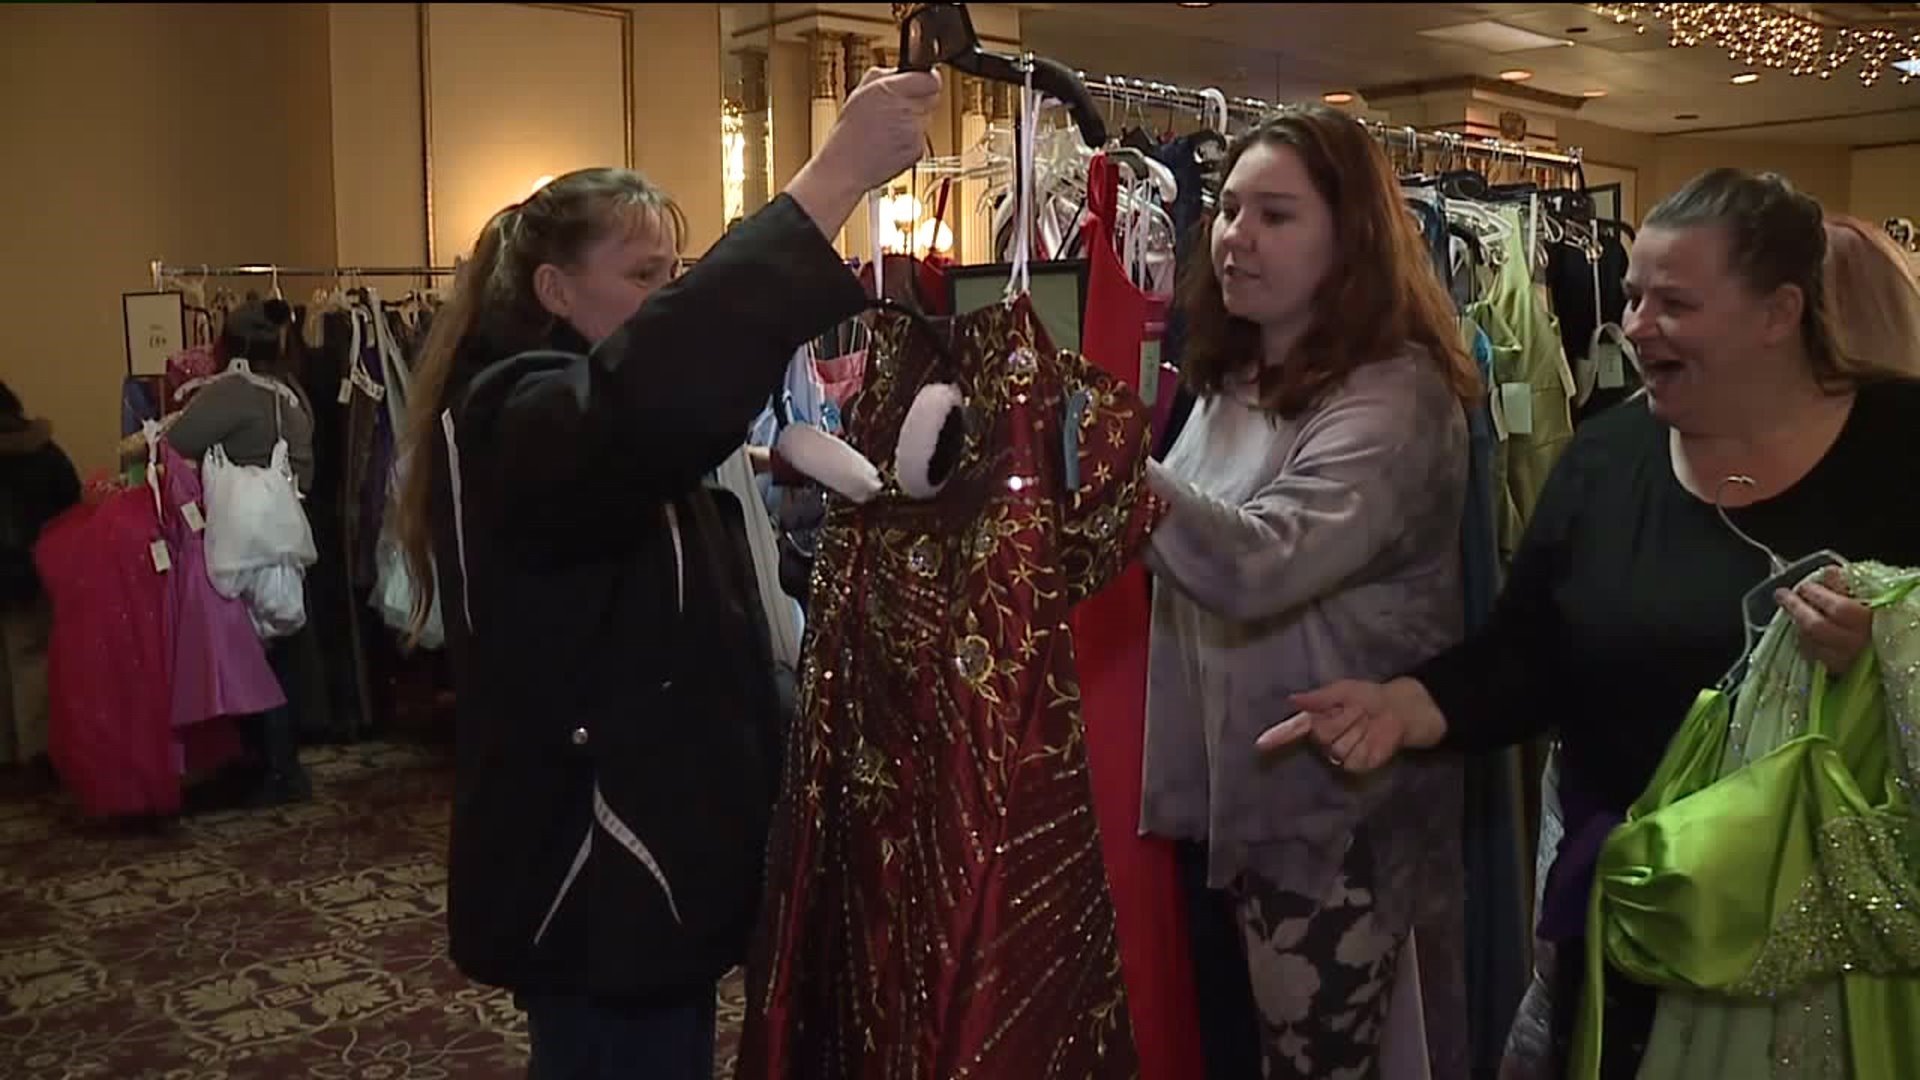 Cinderella's Closet Continues Tradition of Offering Affordable Prom Dresses